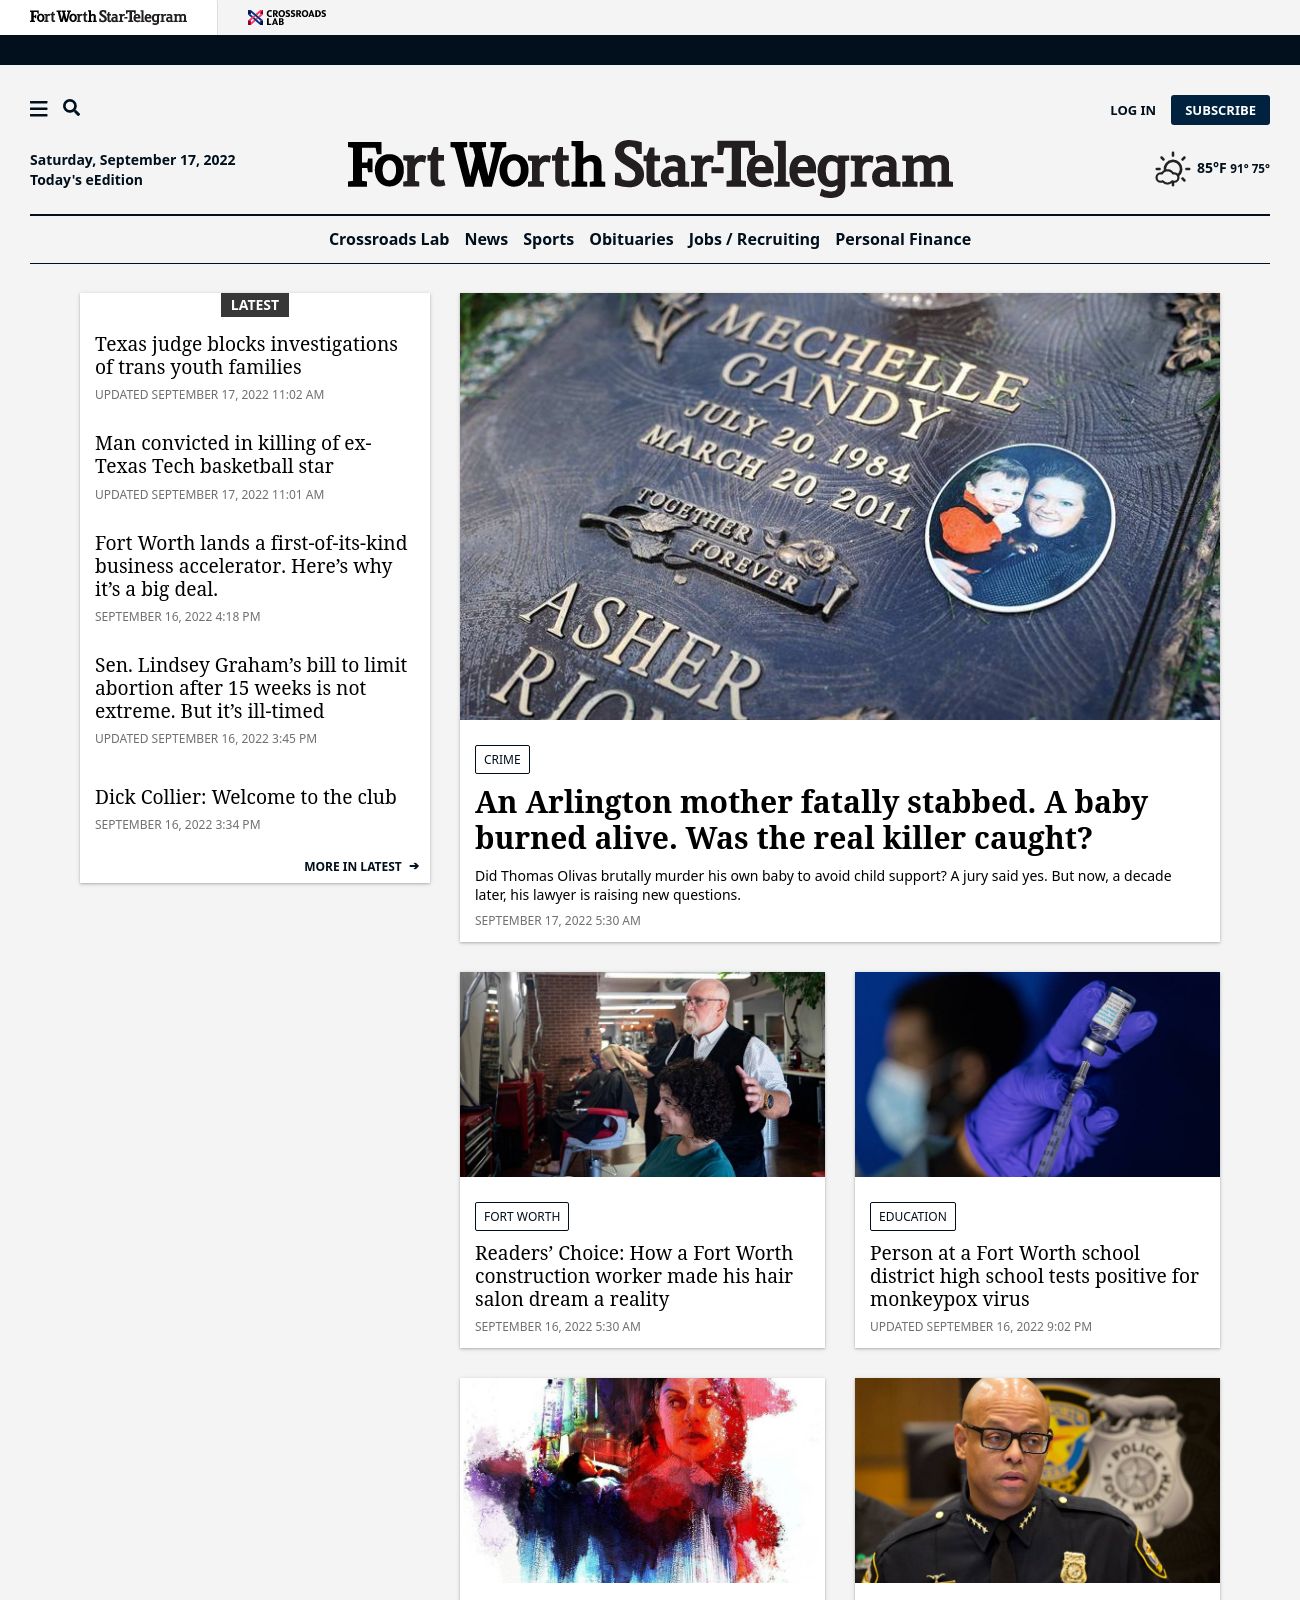 Fort Worth Star-Telegram at 2022-09-17 11:54:52-05:00 local time